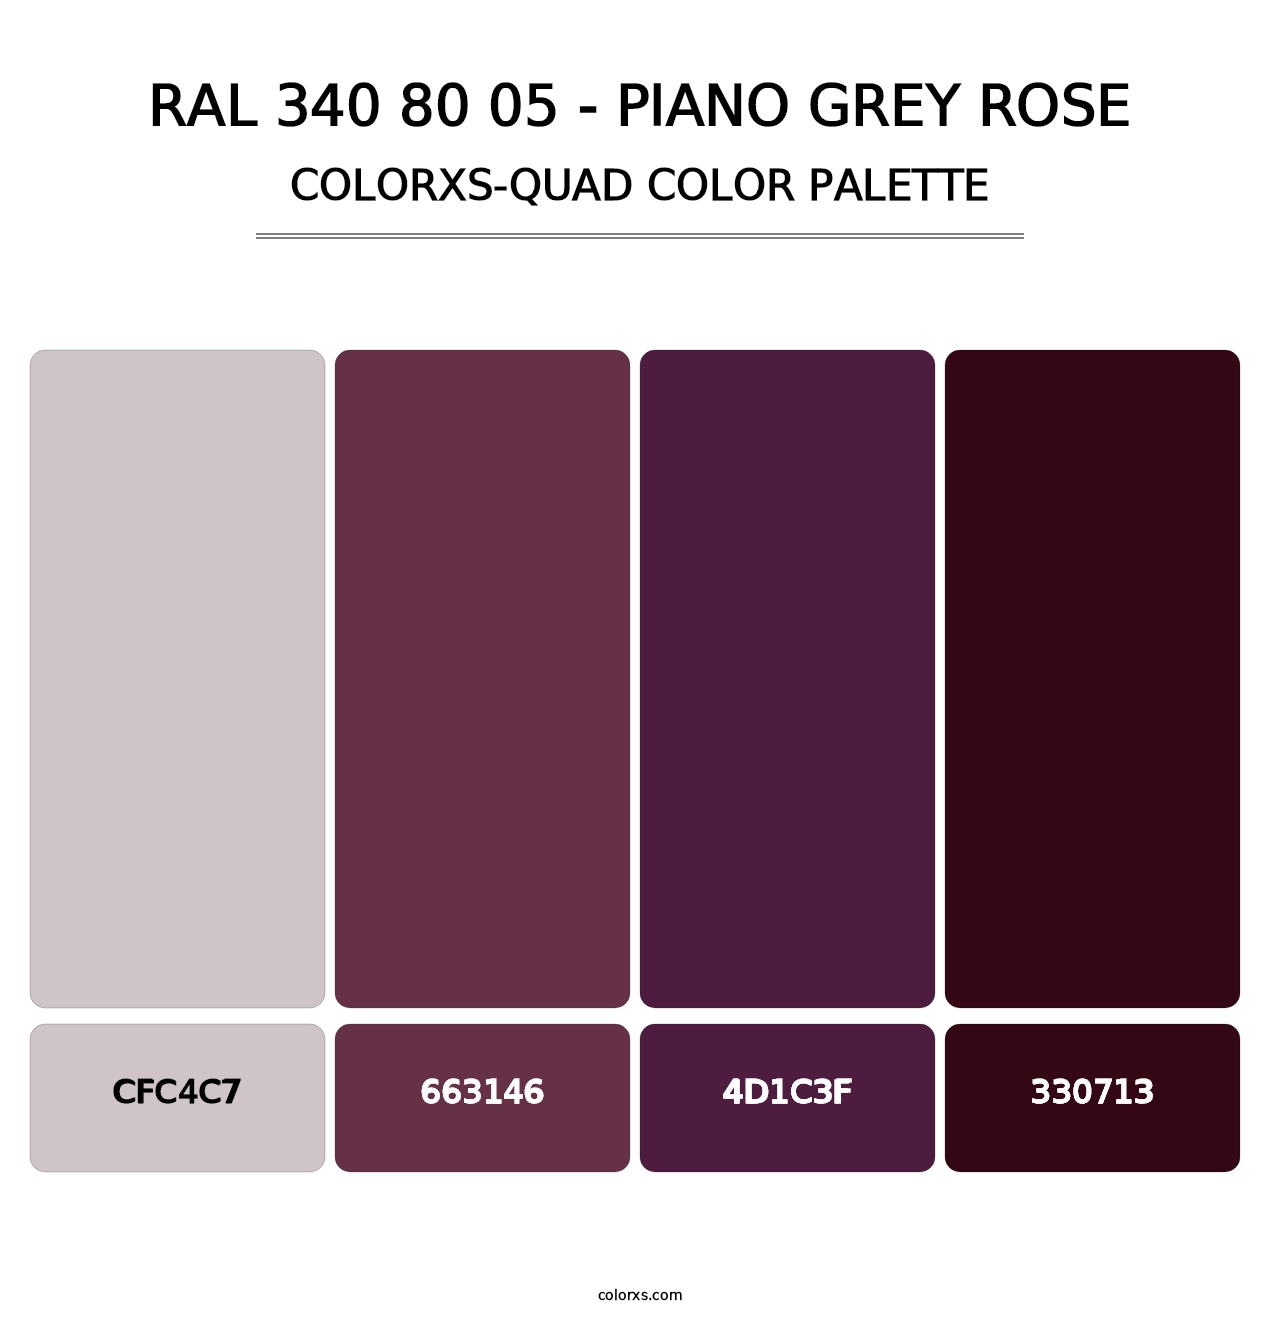 RAL 340 80 05 - Piano Grey Rose - Colorxs Quad Palette